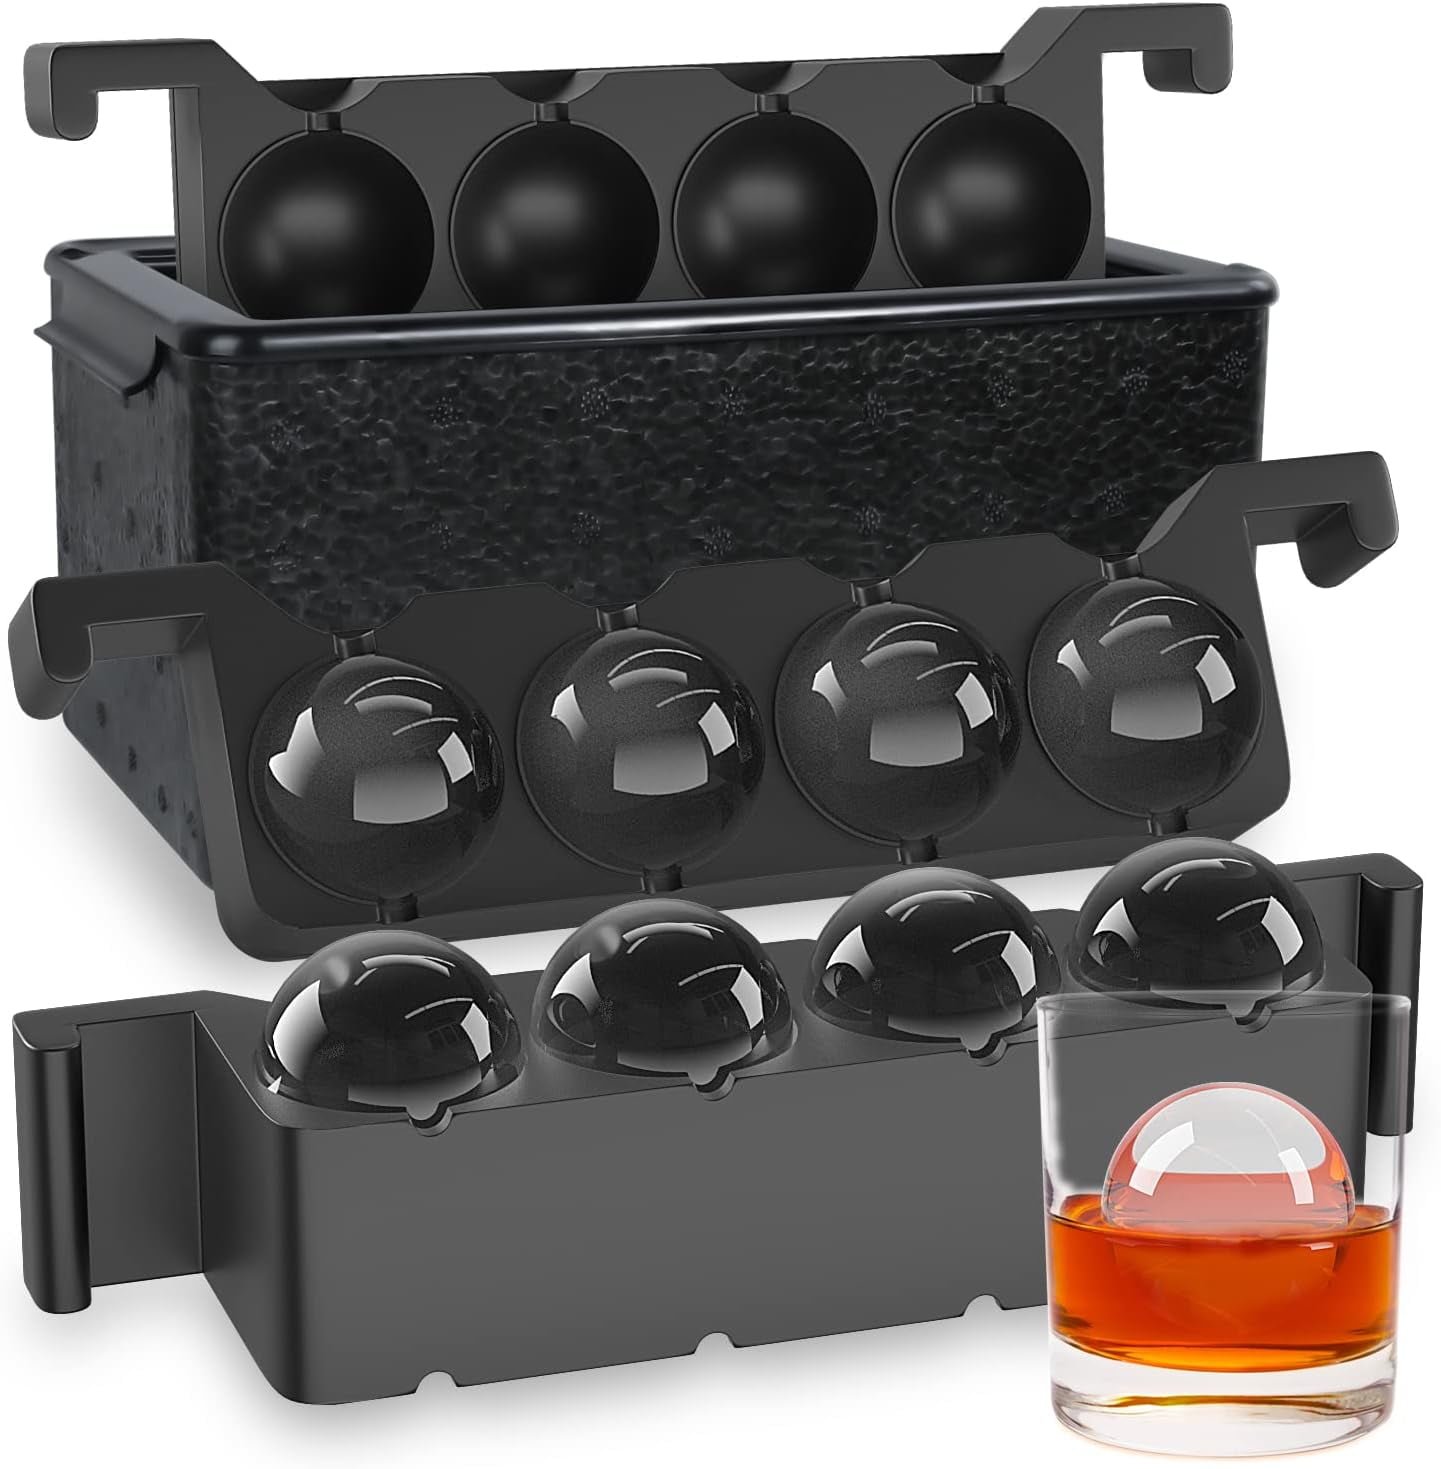 Xinwanna Ice Ball Mold Food Grade Double Layer Pet 4-Hole Drinks Round Ice Ball Tray Maker for Home (1pc,L), Size: Large, Other